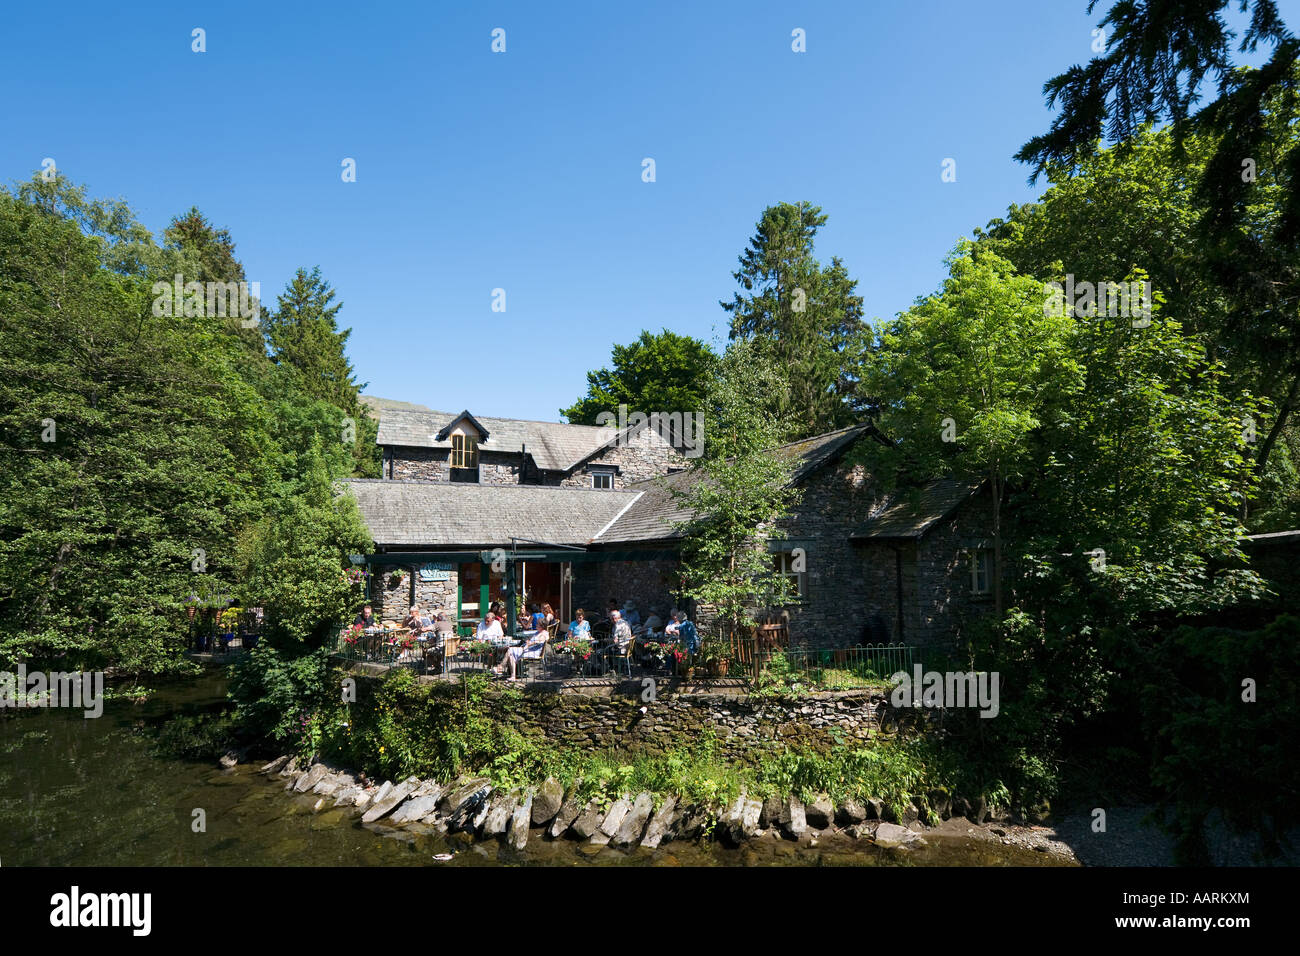 Cafe beside River Rothay, Grasmere, Lake District, Cumbria, England, UK Stock Photo